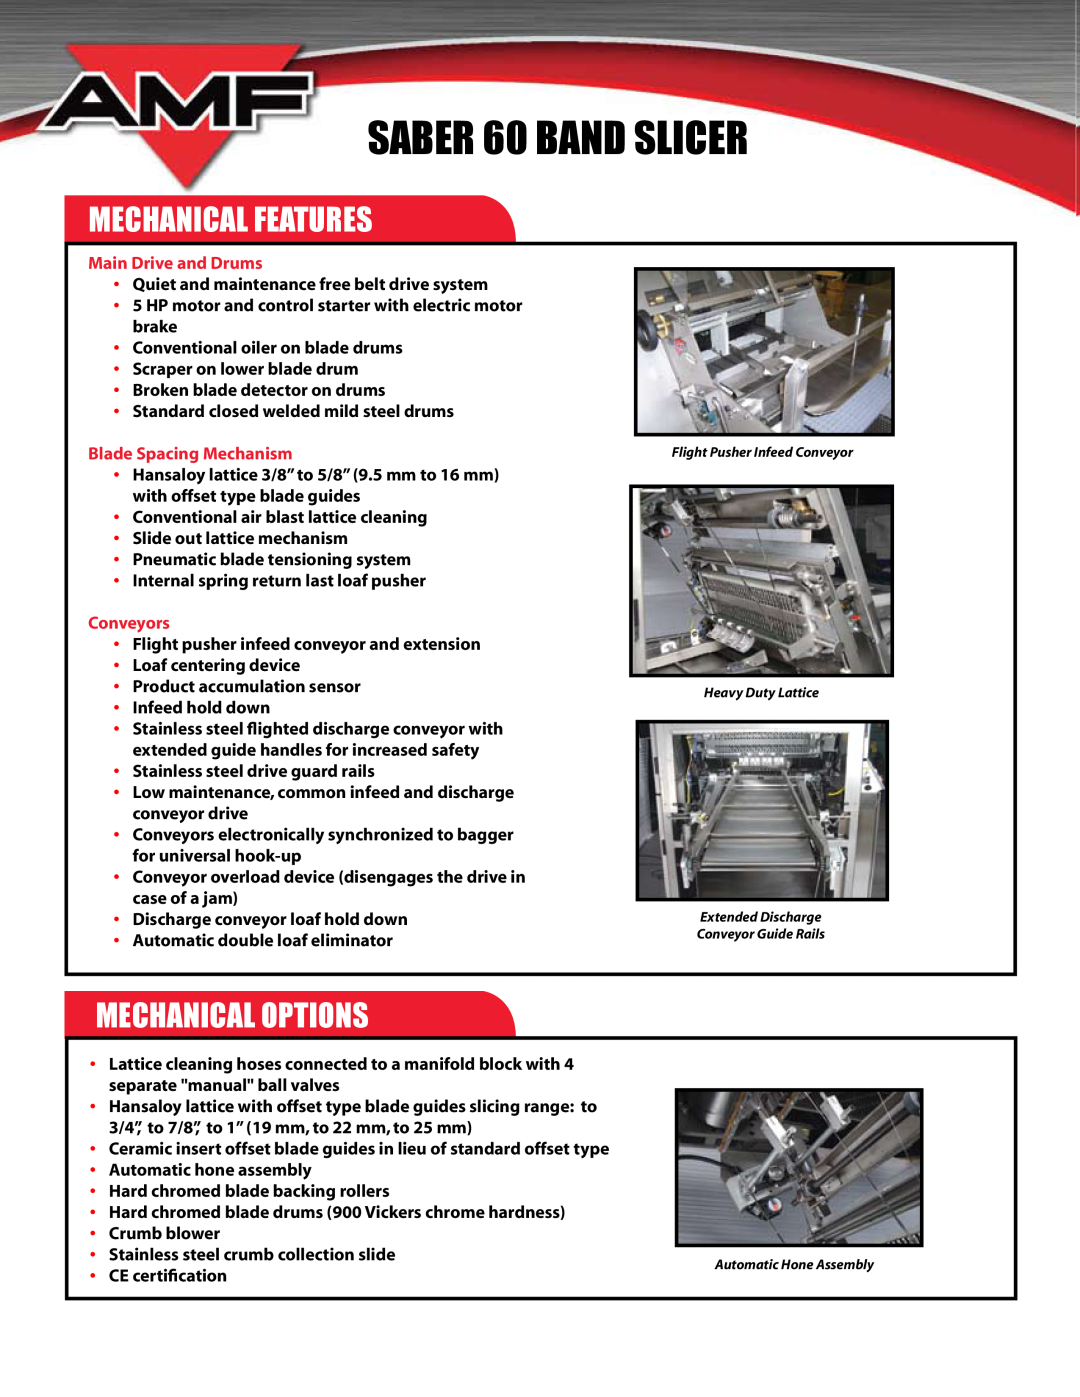 AMF manual SABER 60 BAND SLICER, Mechanical Features, Mechanical Options, Main Drive and Drums, Blade Spacing Mechanism 